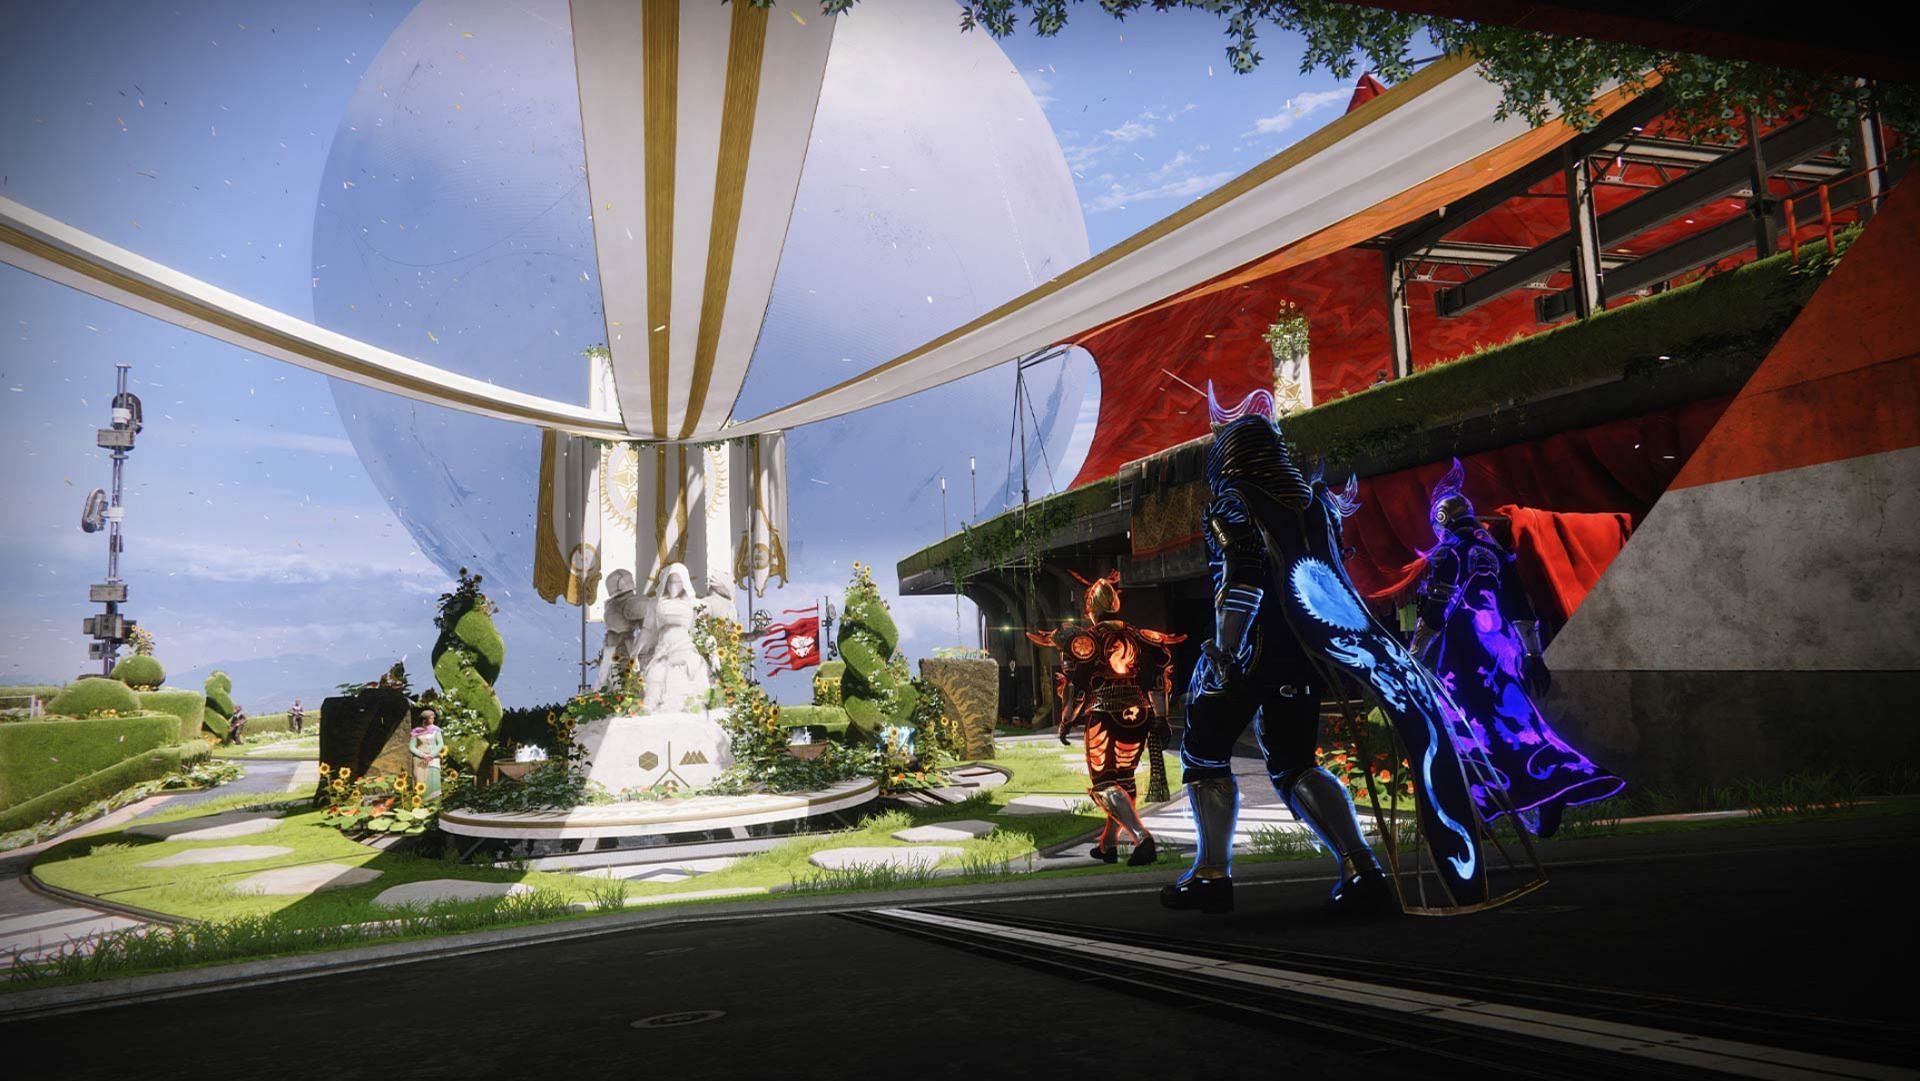 Destiny 2 Tower rework and decoration for the upcoming Solstice event (Image via Bungie)